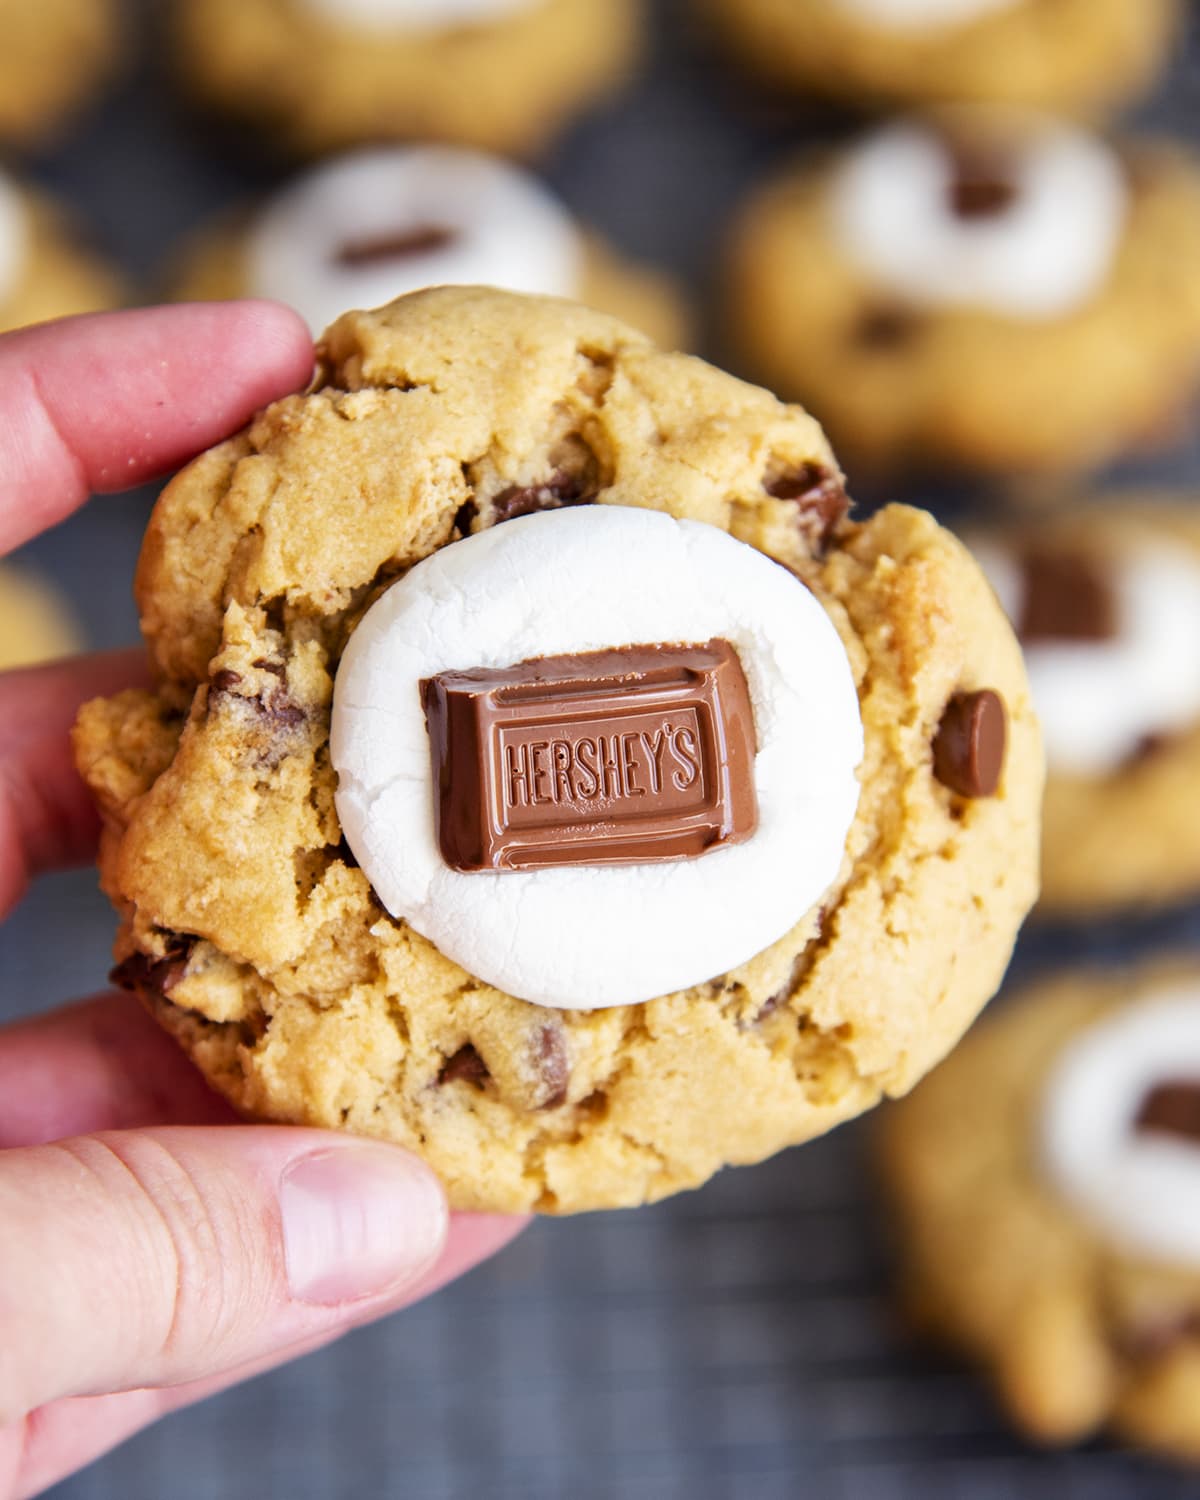 A hand holding a s'mores chocolate chip cookie topped with a marshmallow and a Hershey's chocolate.